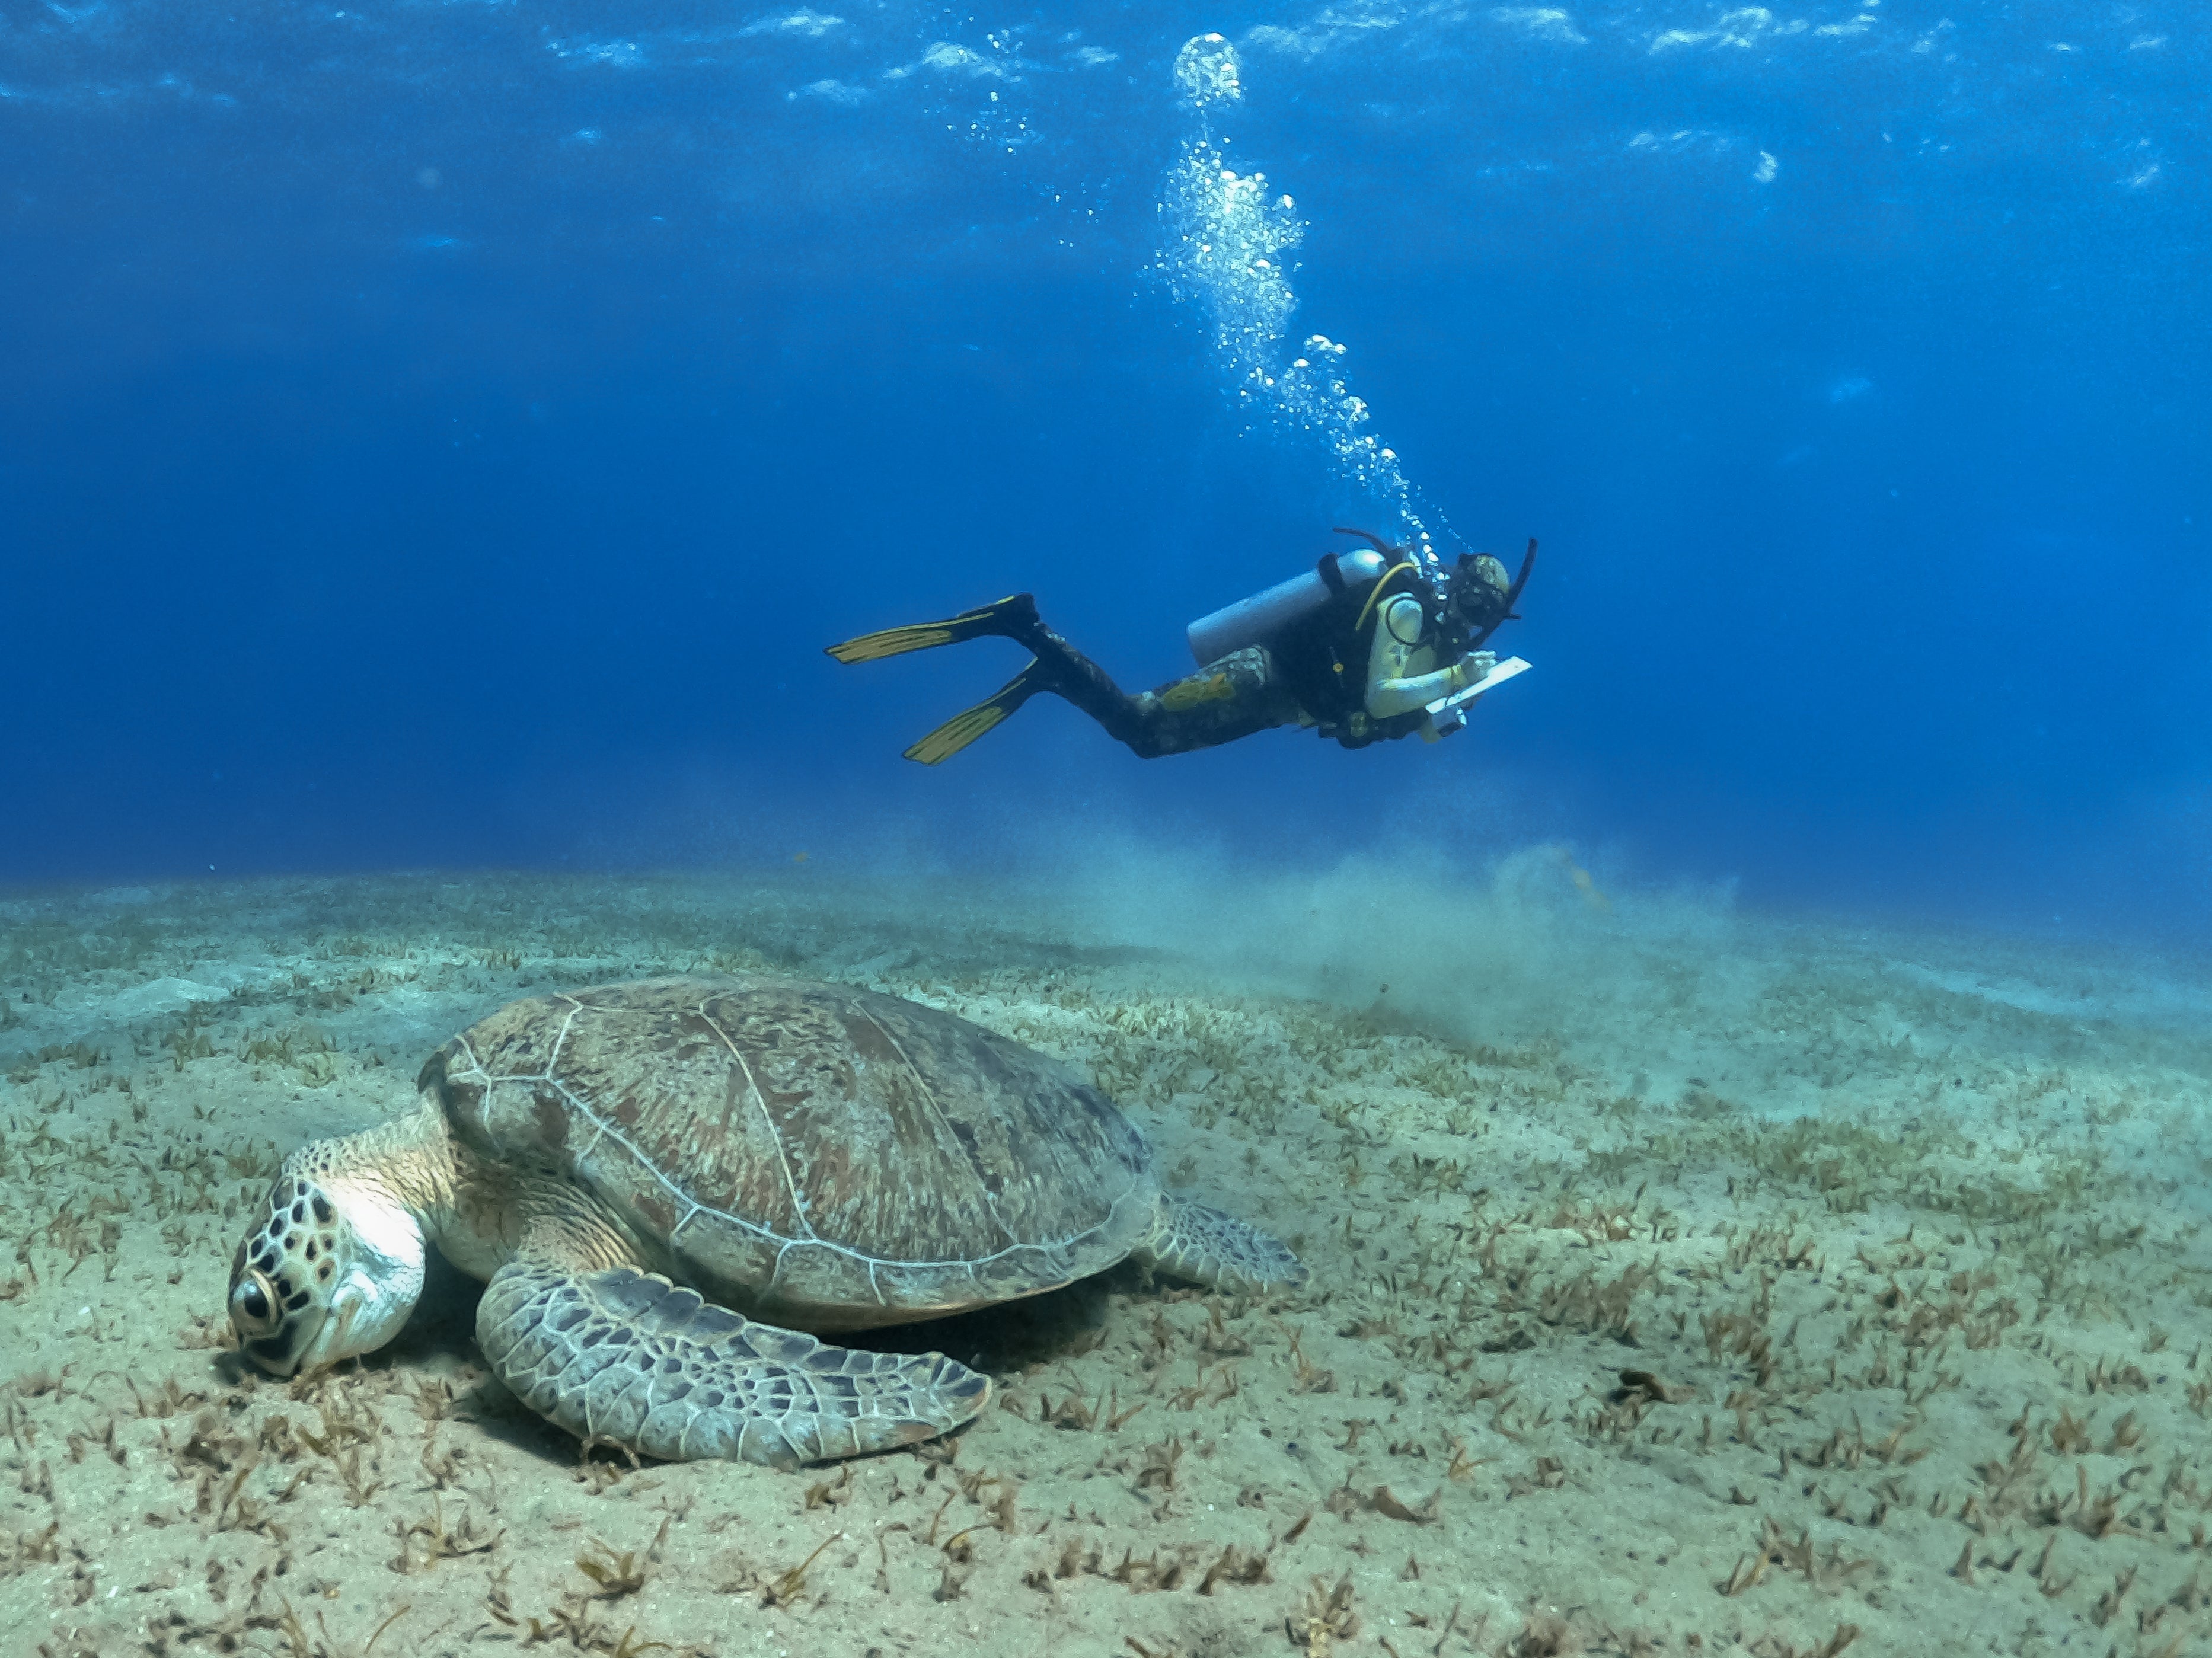 Red Sea Safaris dives combine marine-life spotting with data collection